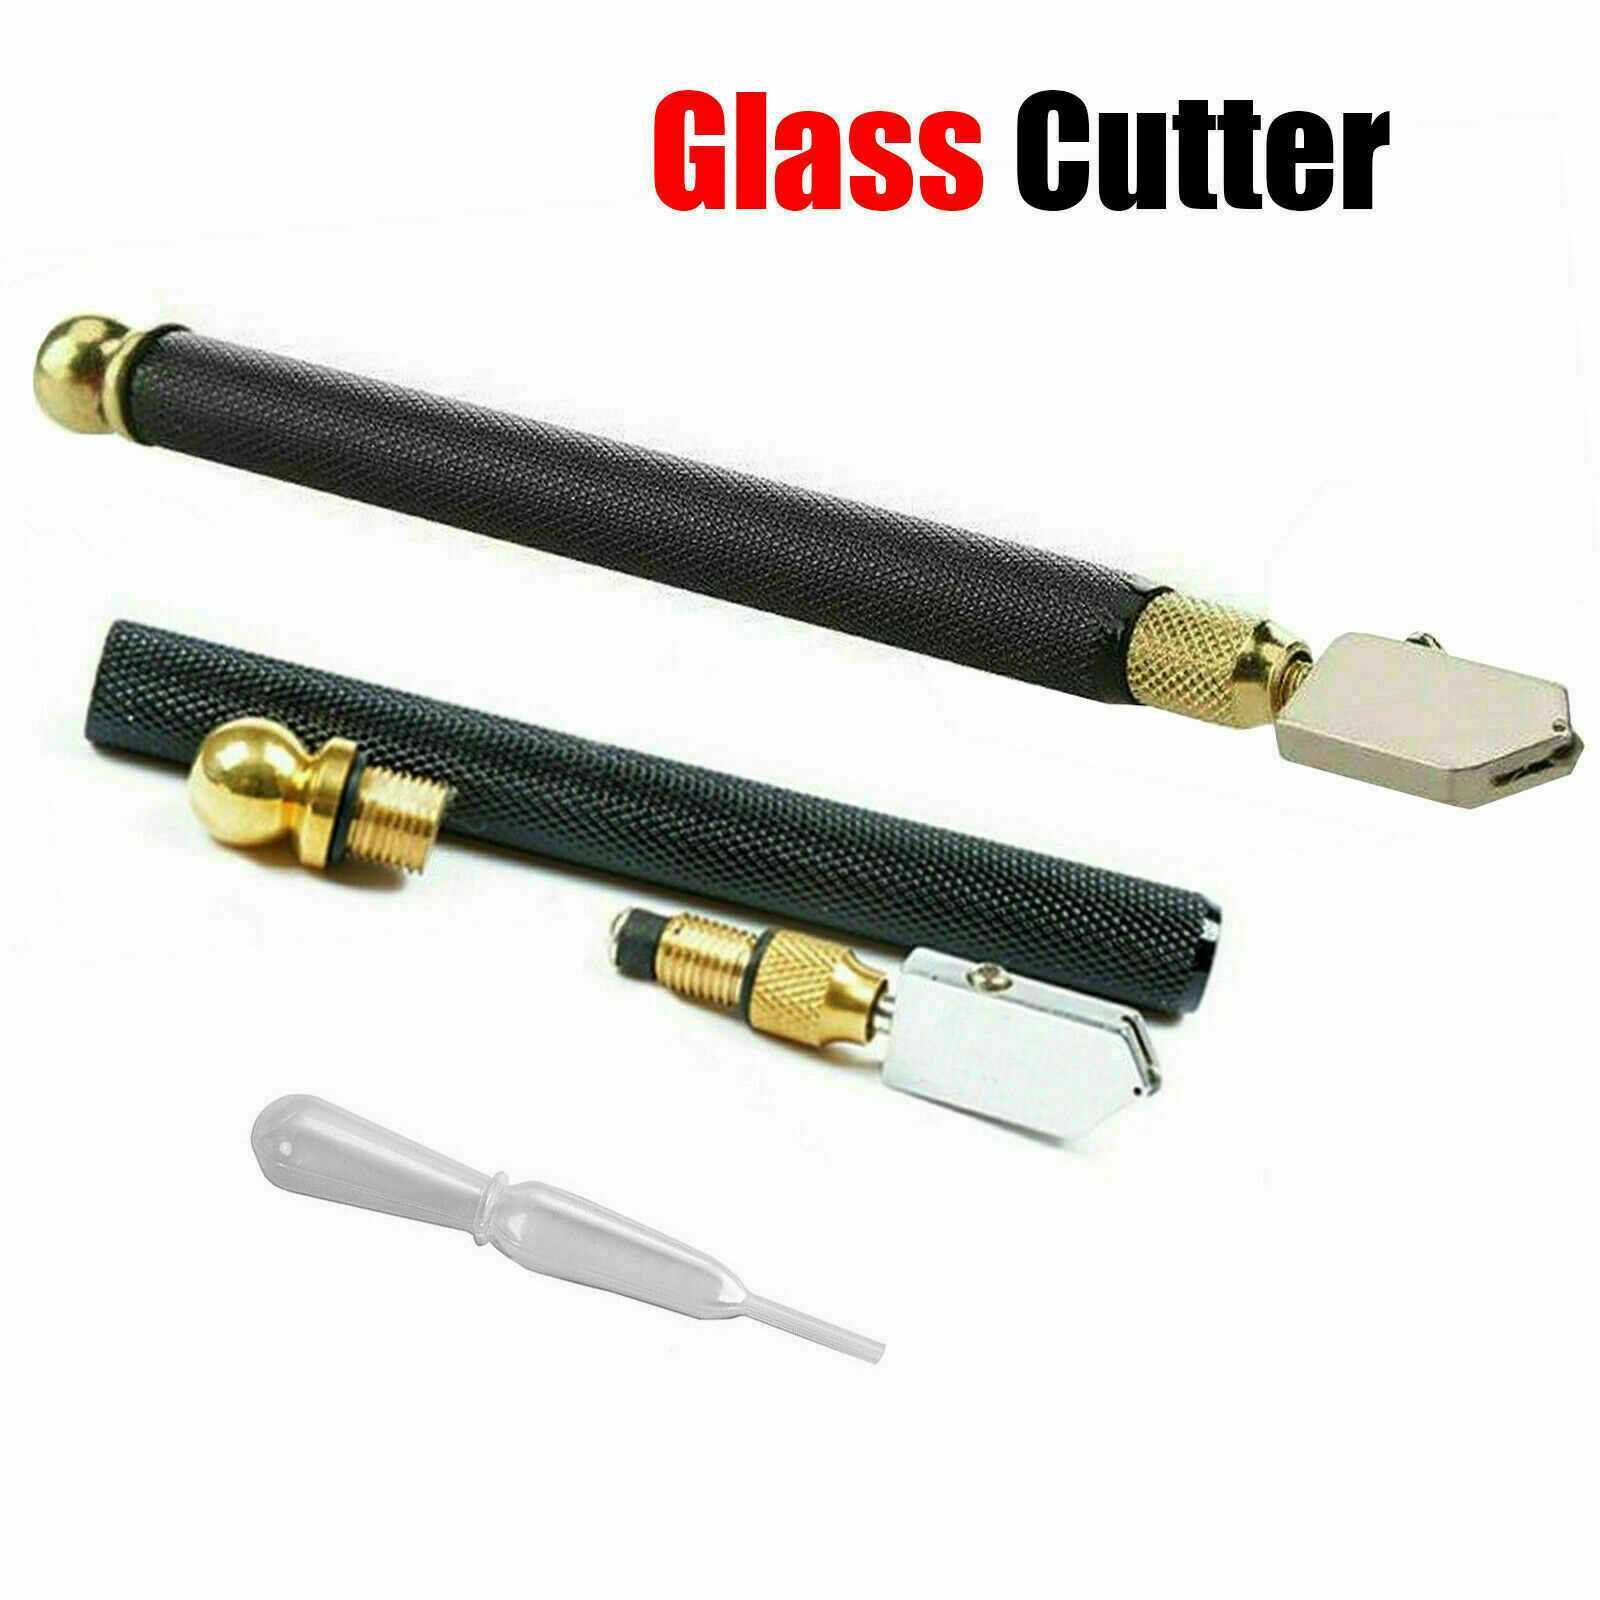 Professional Glass Cutter Oil Lubricated Cutters With Grip Carbide Precision